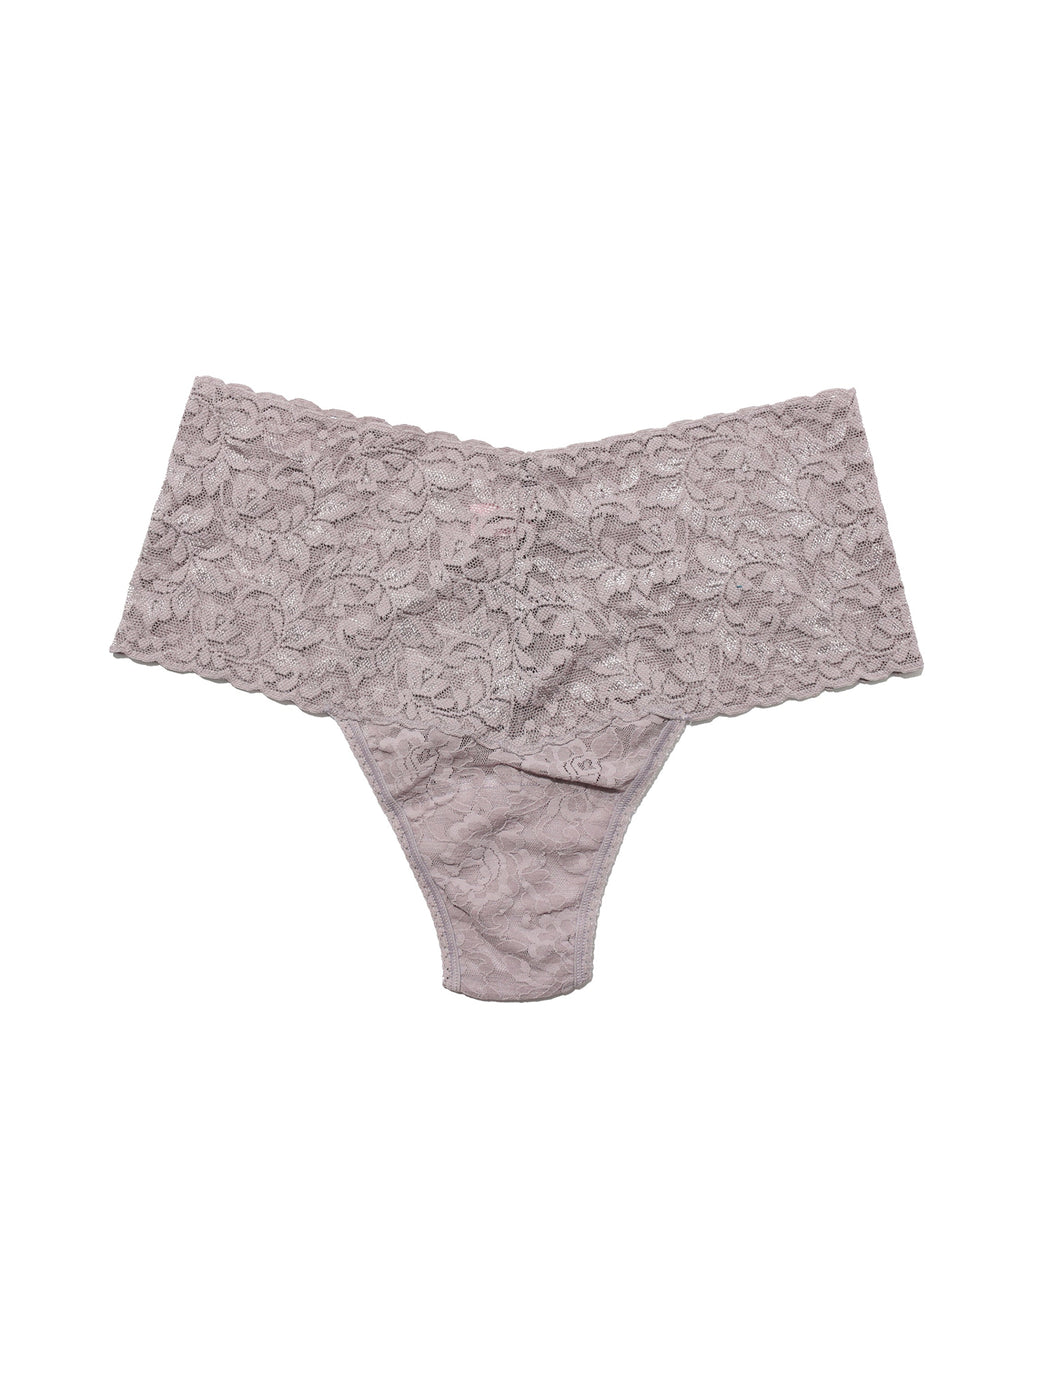 Retro Lace Thong Steel Grey Sale